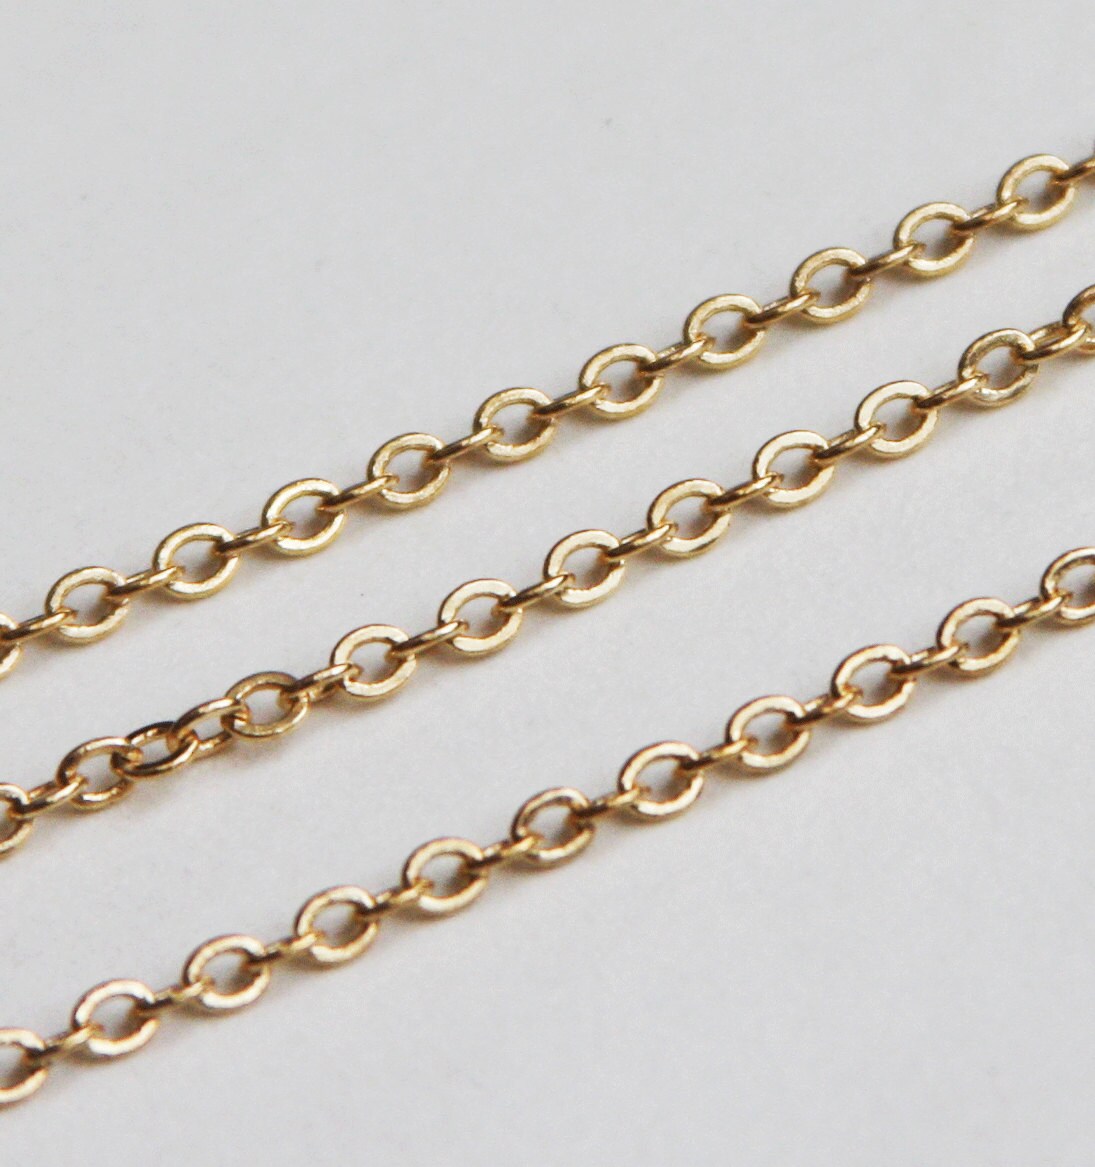 10 ft of Gold plated flat cable chain 3X3mm gold chain gold